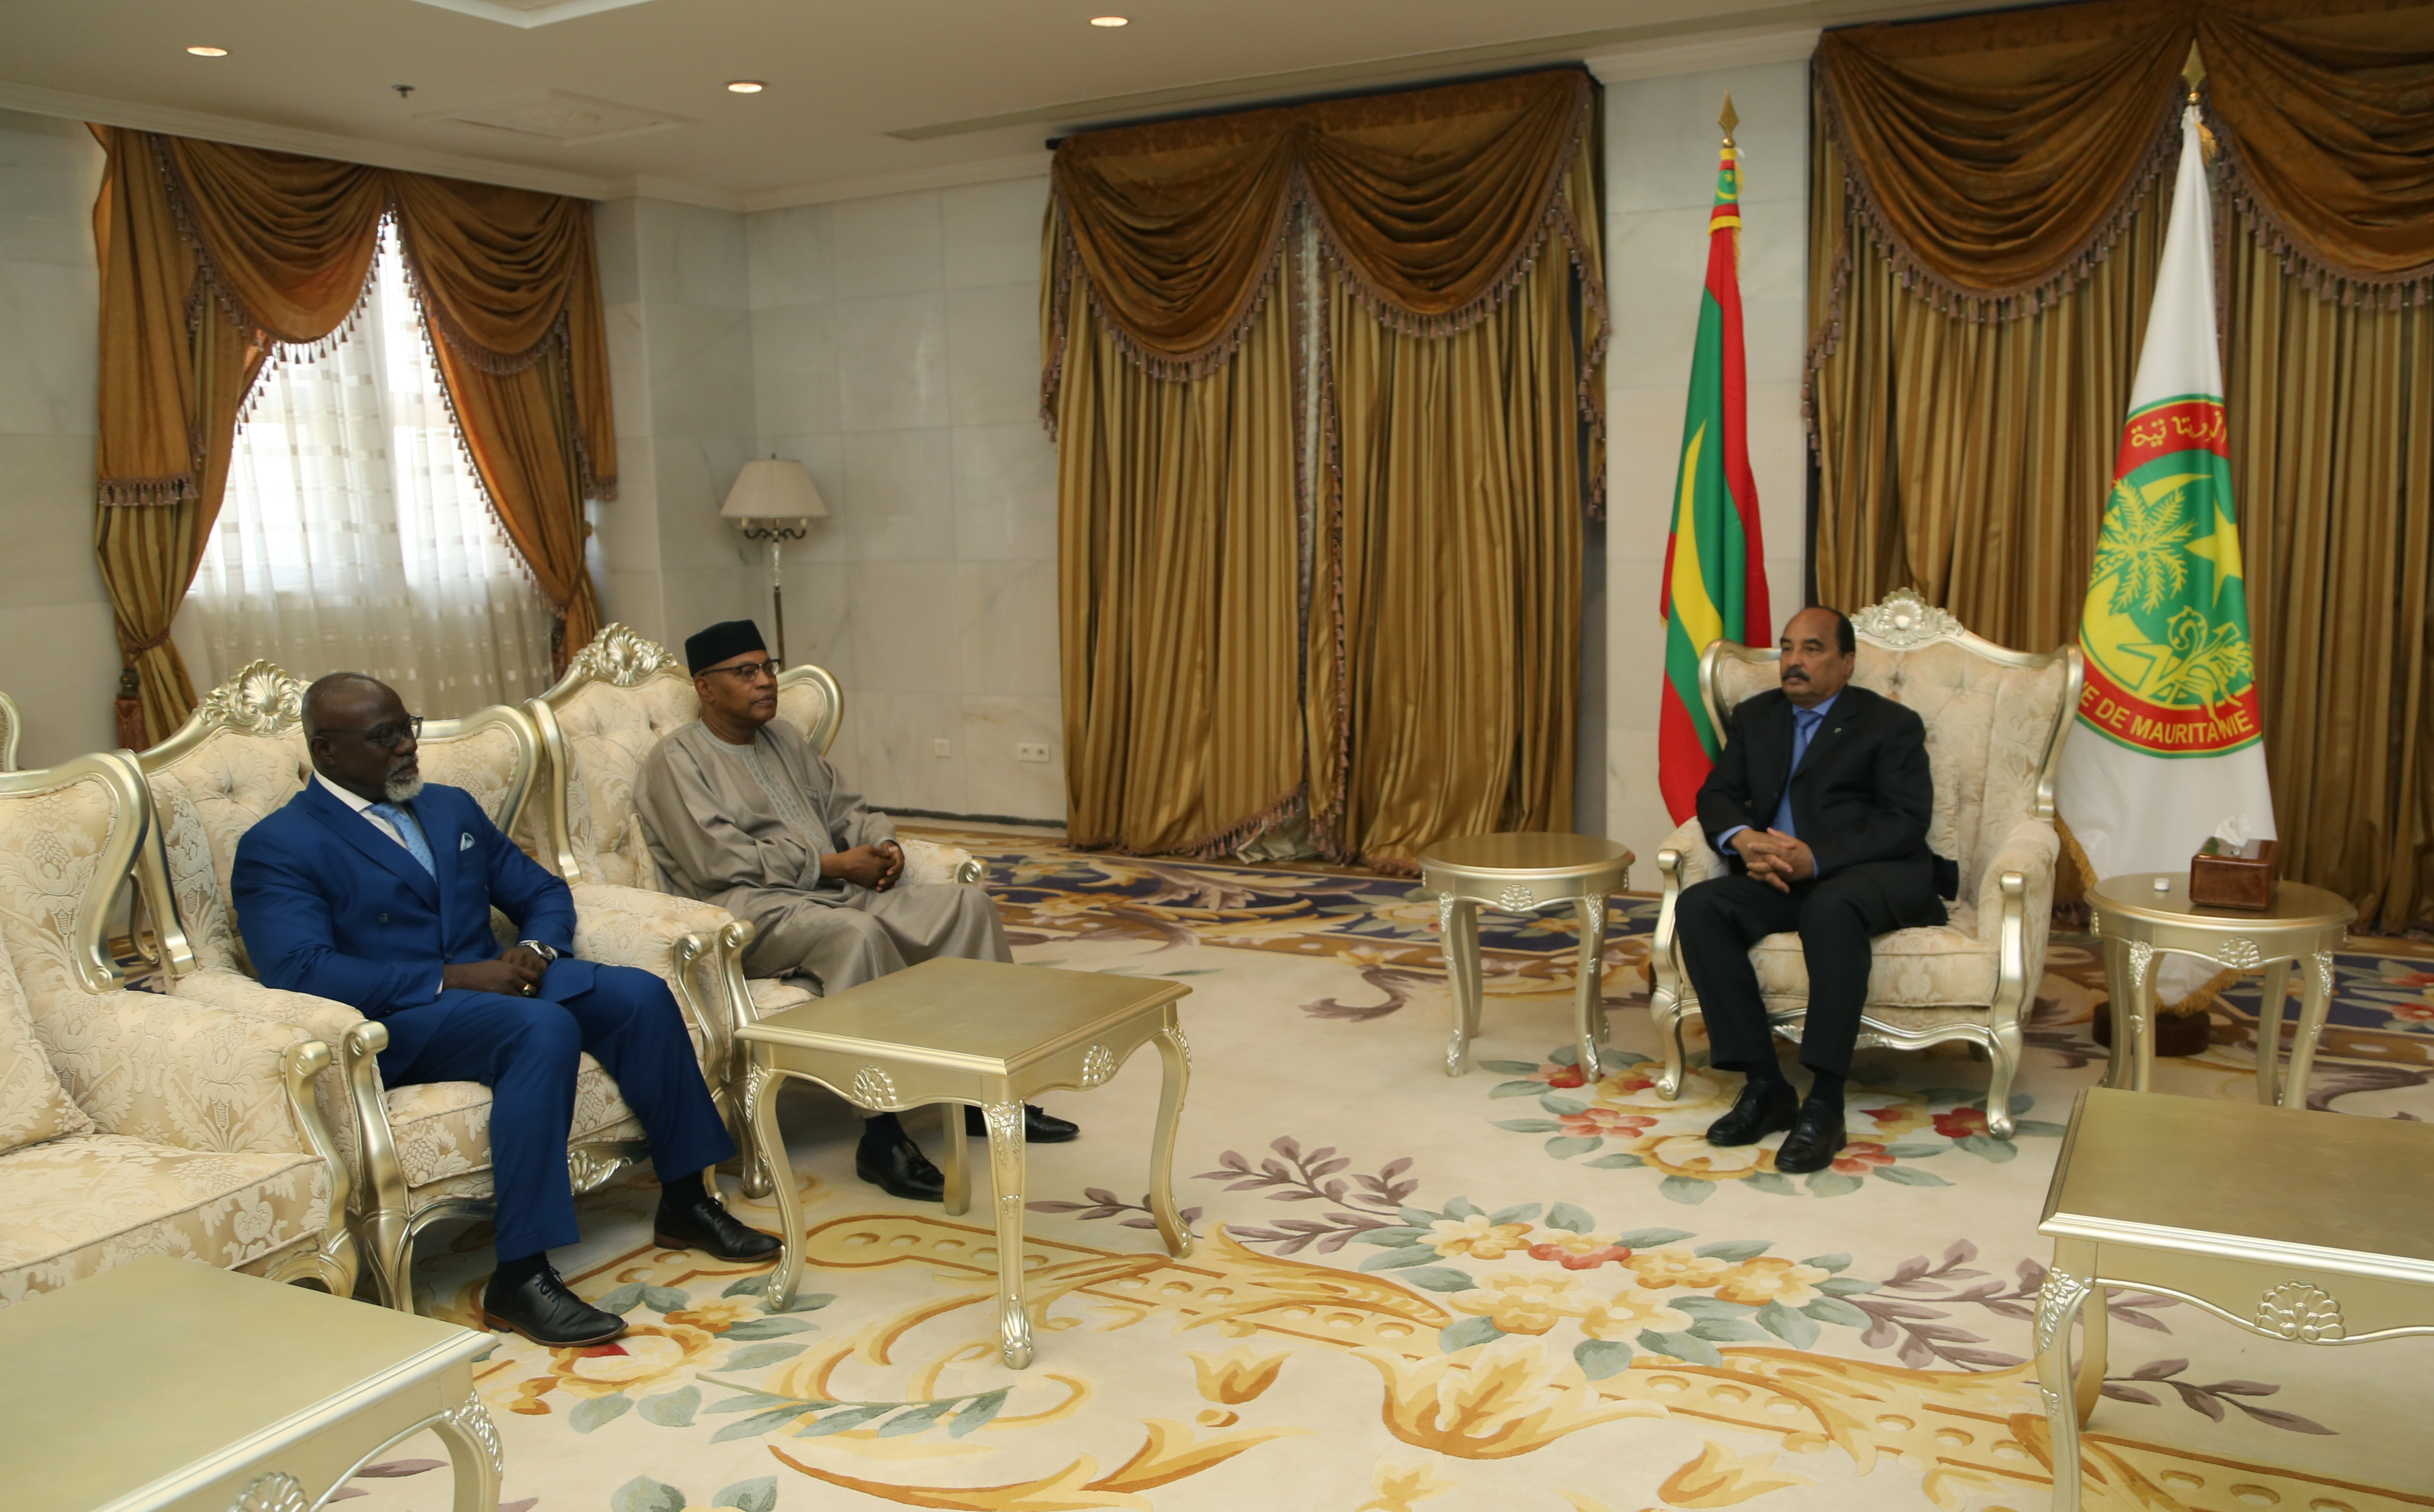 Special Representative and head of the UN Office for West Africa and the Sahel, Mohamed Ibn Chambas (centre), during a visit to Mauritania. UN Photo